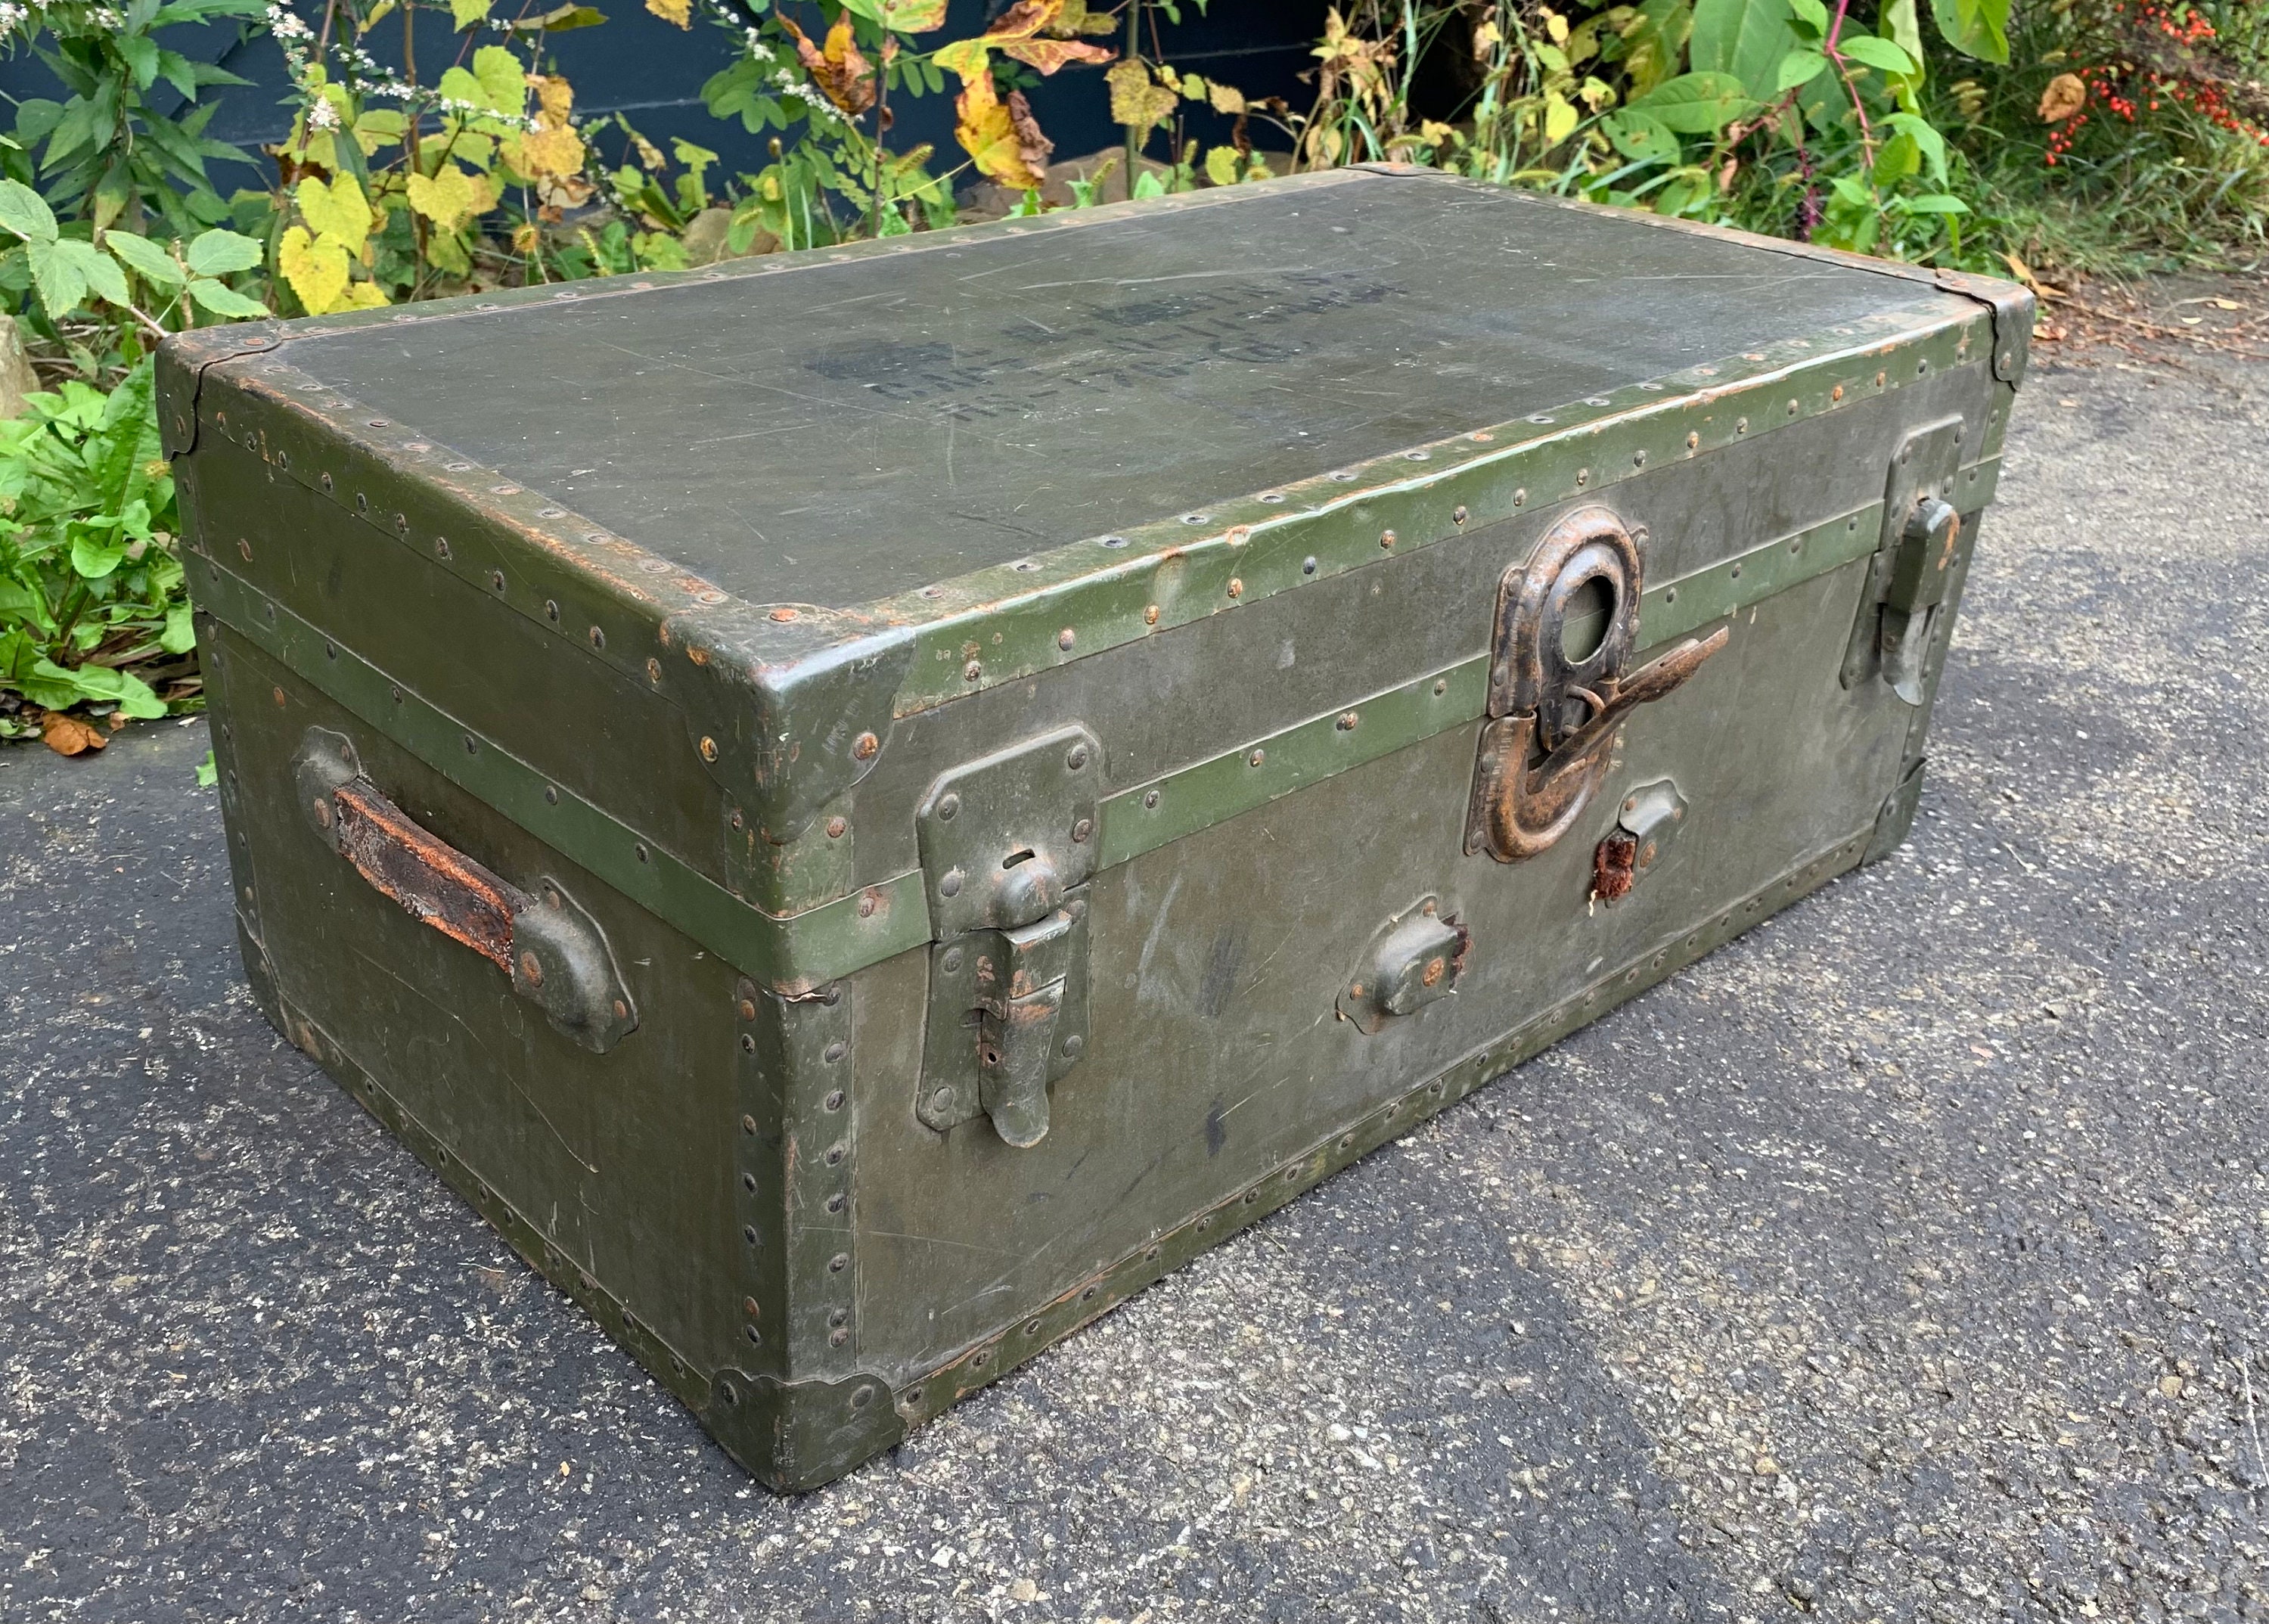 1947 Vintage Foot Locker Trunk WWII Era Authentic WITH TRAY FOR DISPLAY  RESTORE